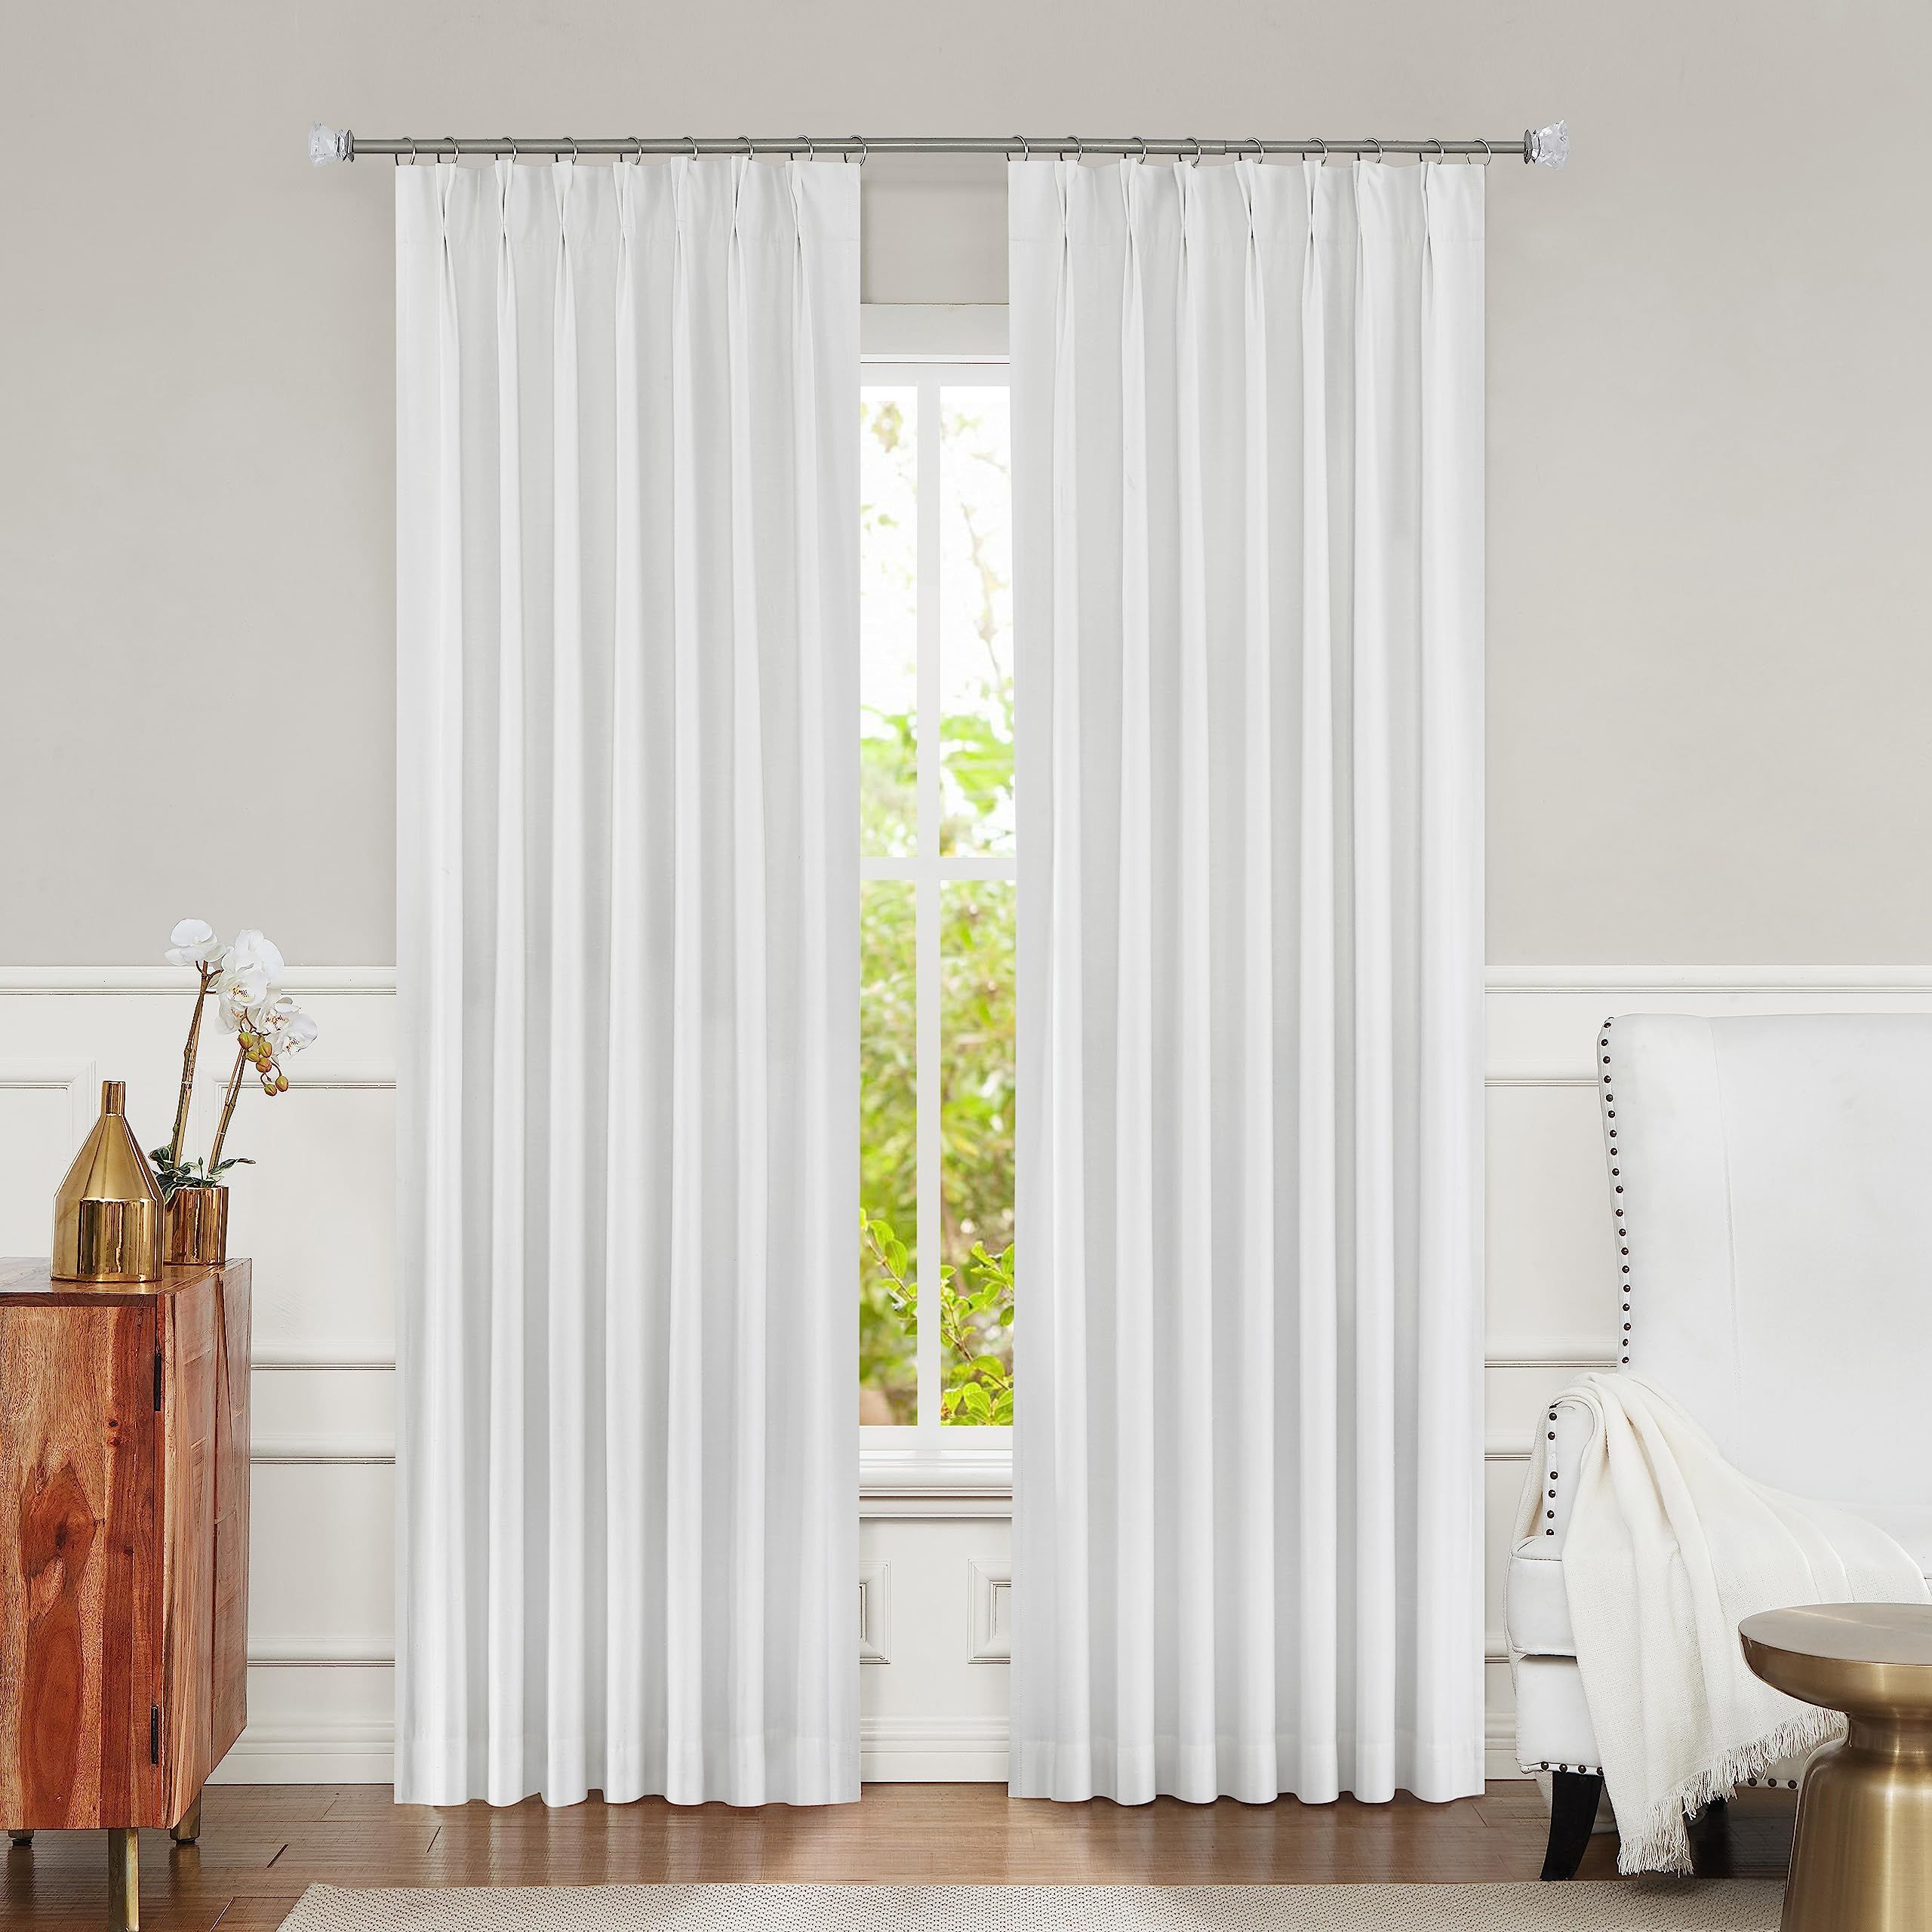 White Full Blackout Pinch Pleated Curtain 95 Inches Long for Bedroom Noise Reducing Window Treatment Thermal Insulated Backtab Drapes with 9 Hooks (Ring not Include), 40"x95"x2, Bright White | Amazon (US)